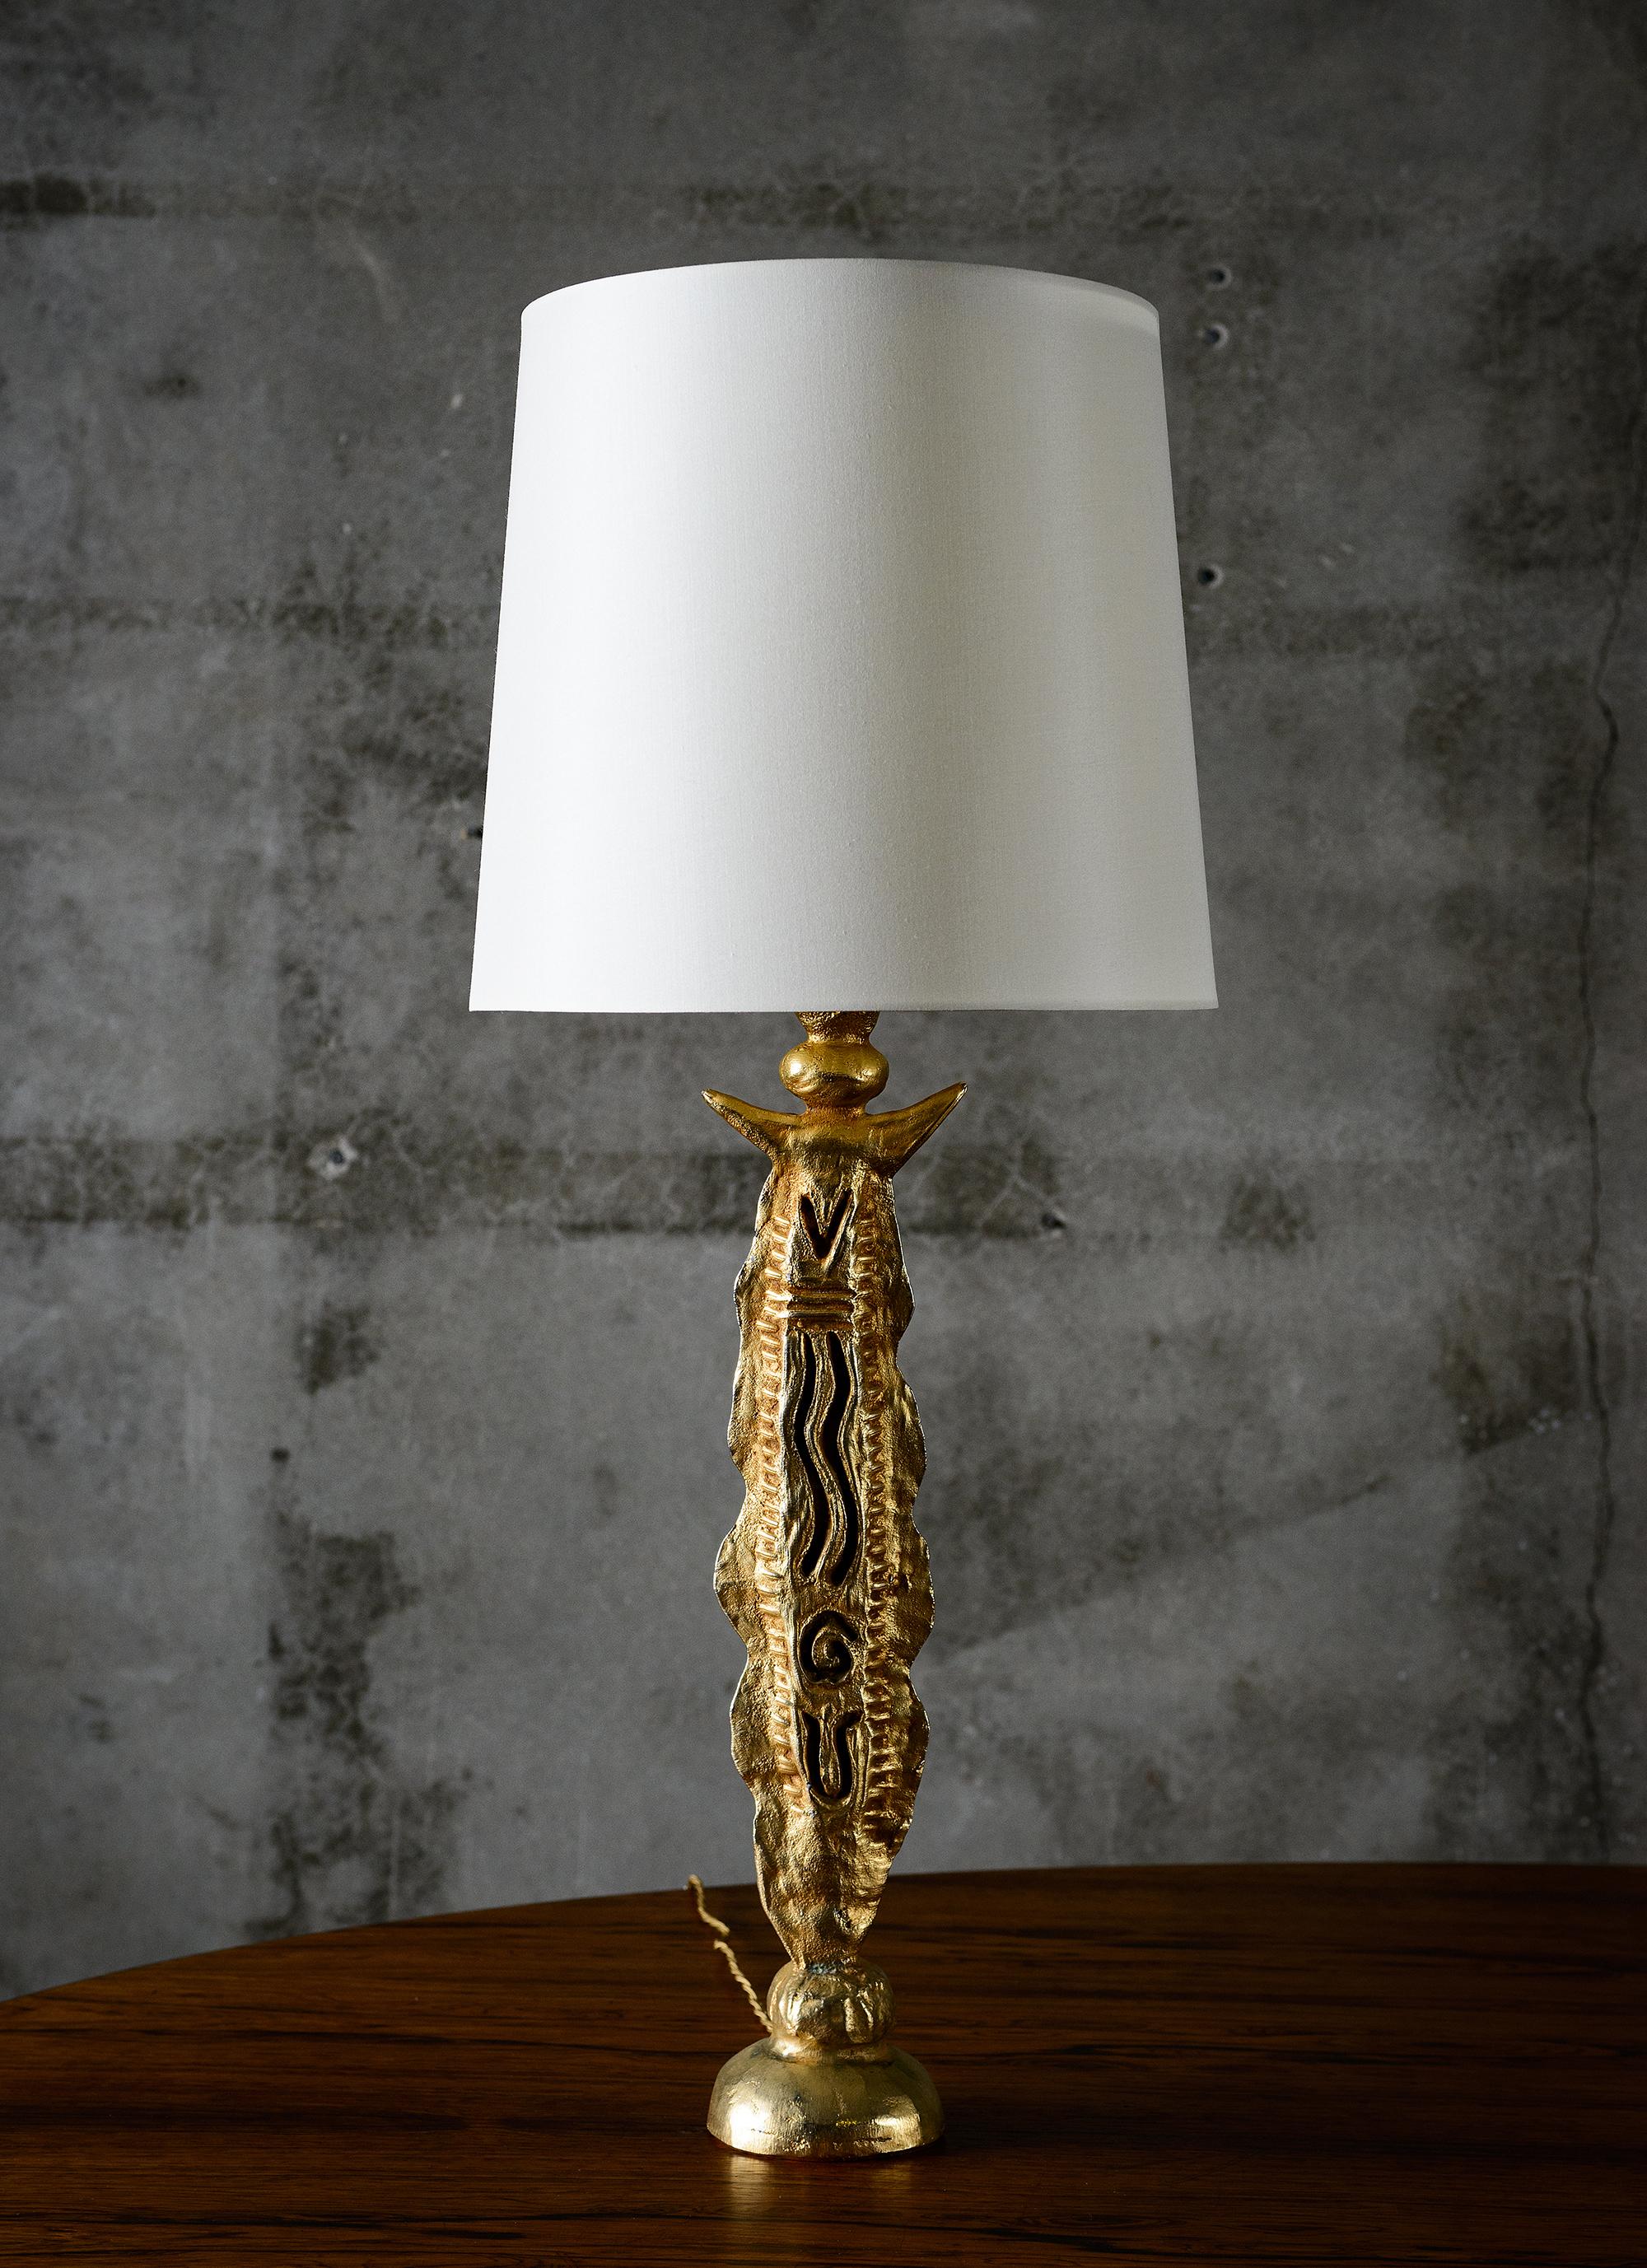 Pierre Casanove Gilt Table Lamps In Excellent Condition For Sale In Los Angeles, CA